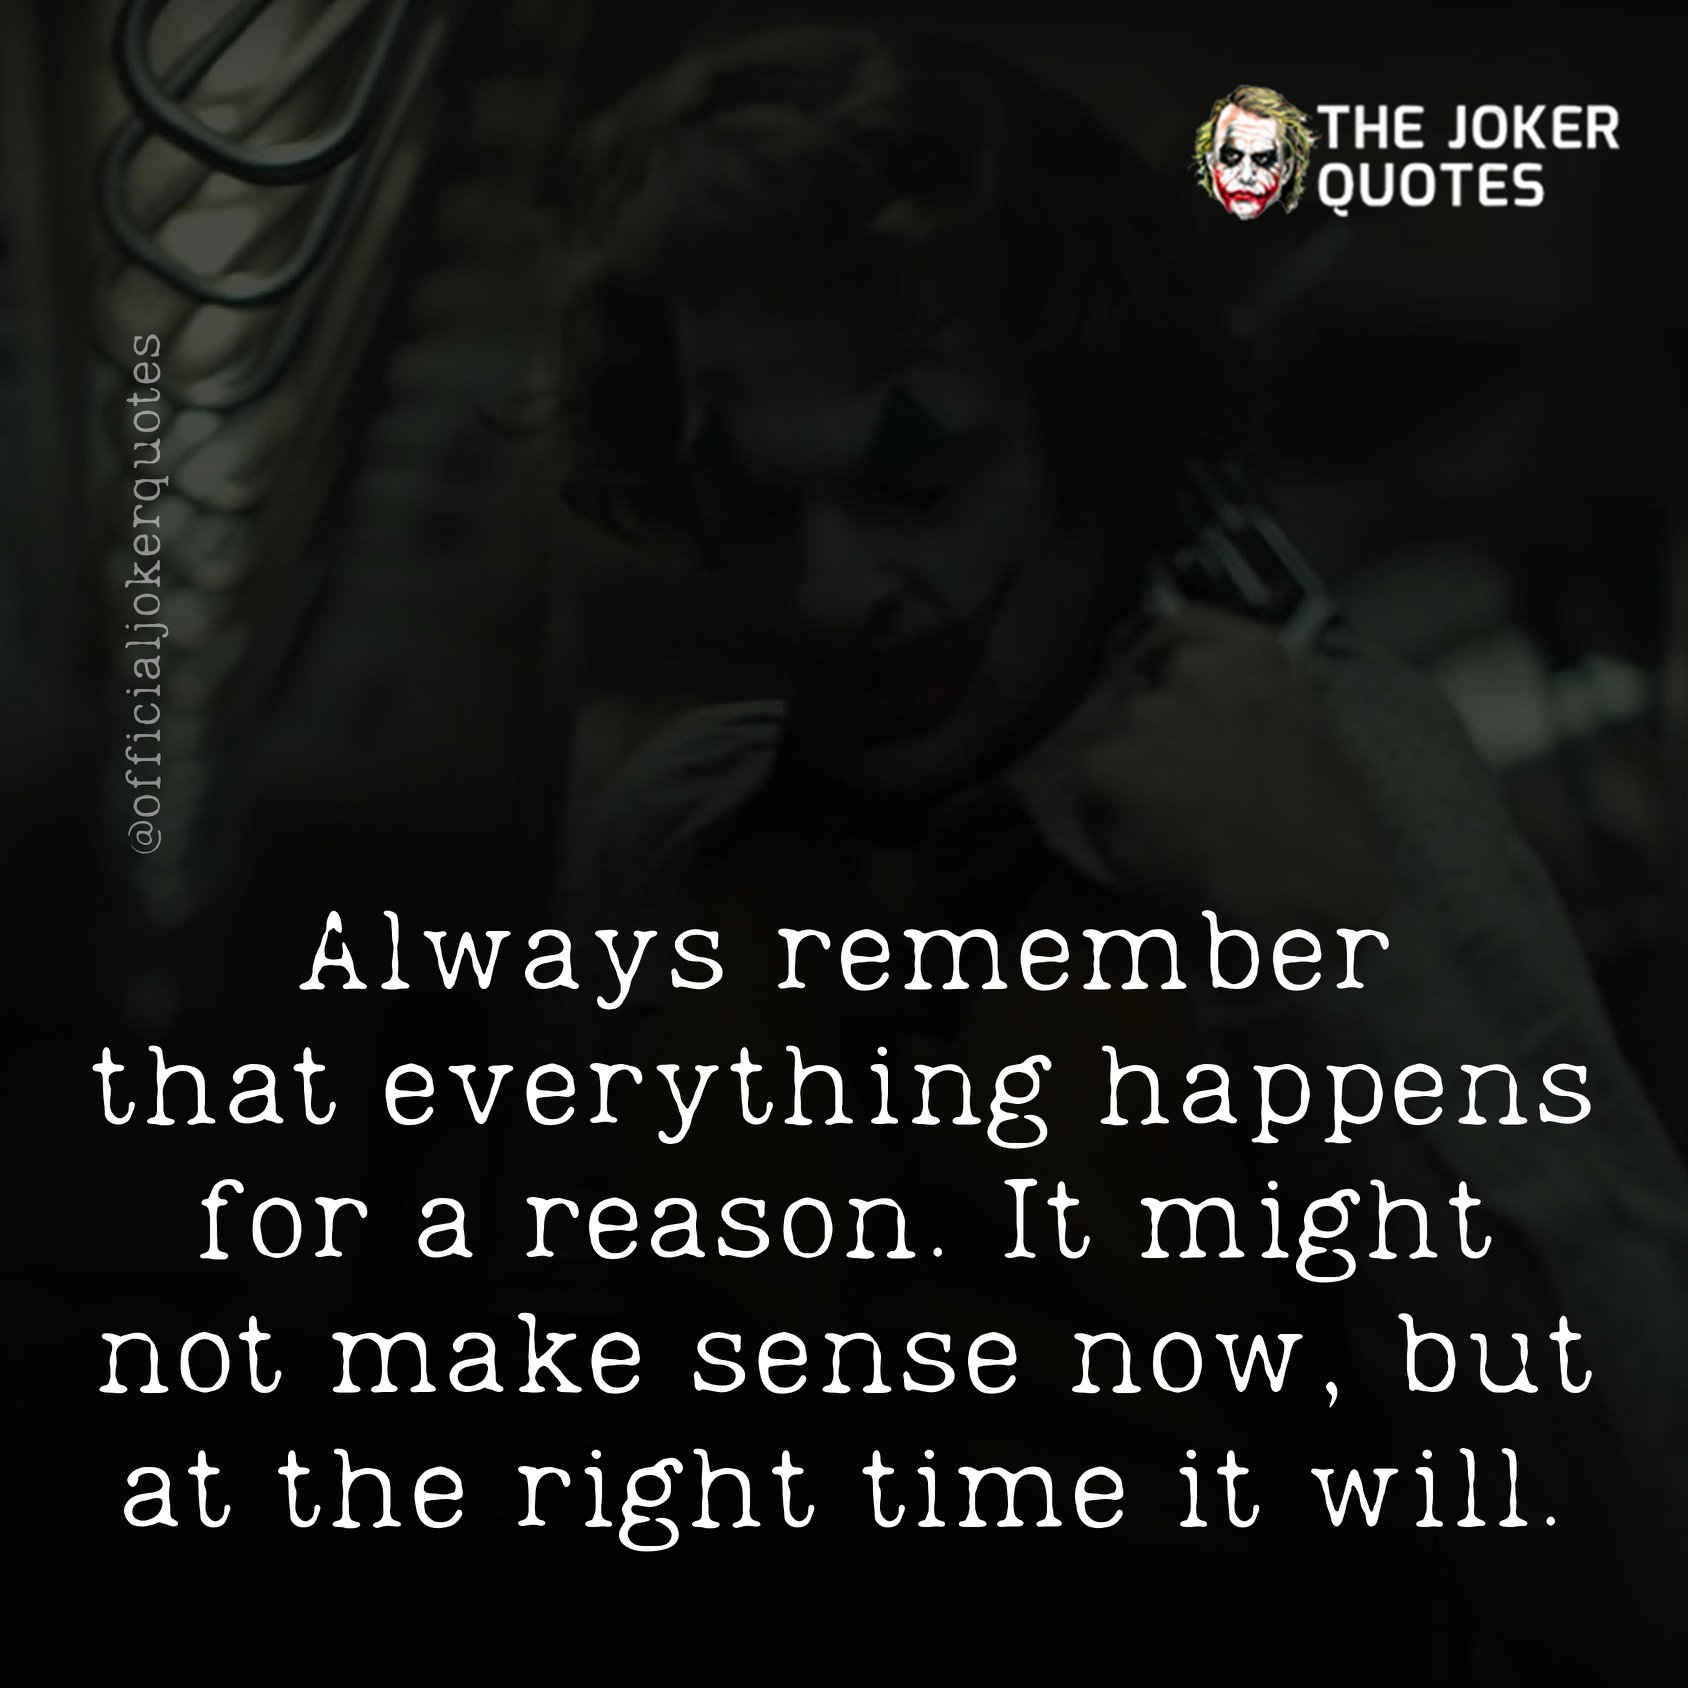 Always remember that everything happens for a reason. It might not make sense now, but at the right time it will.